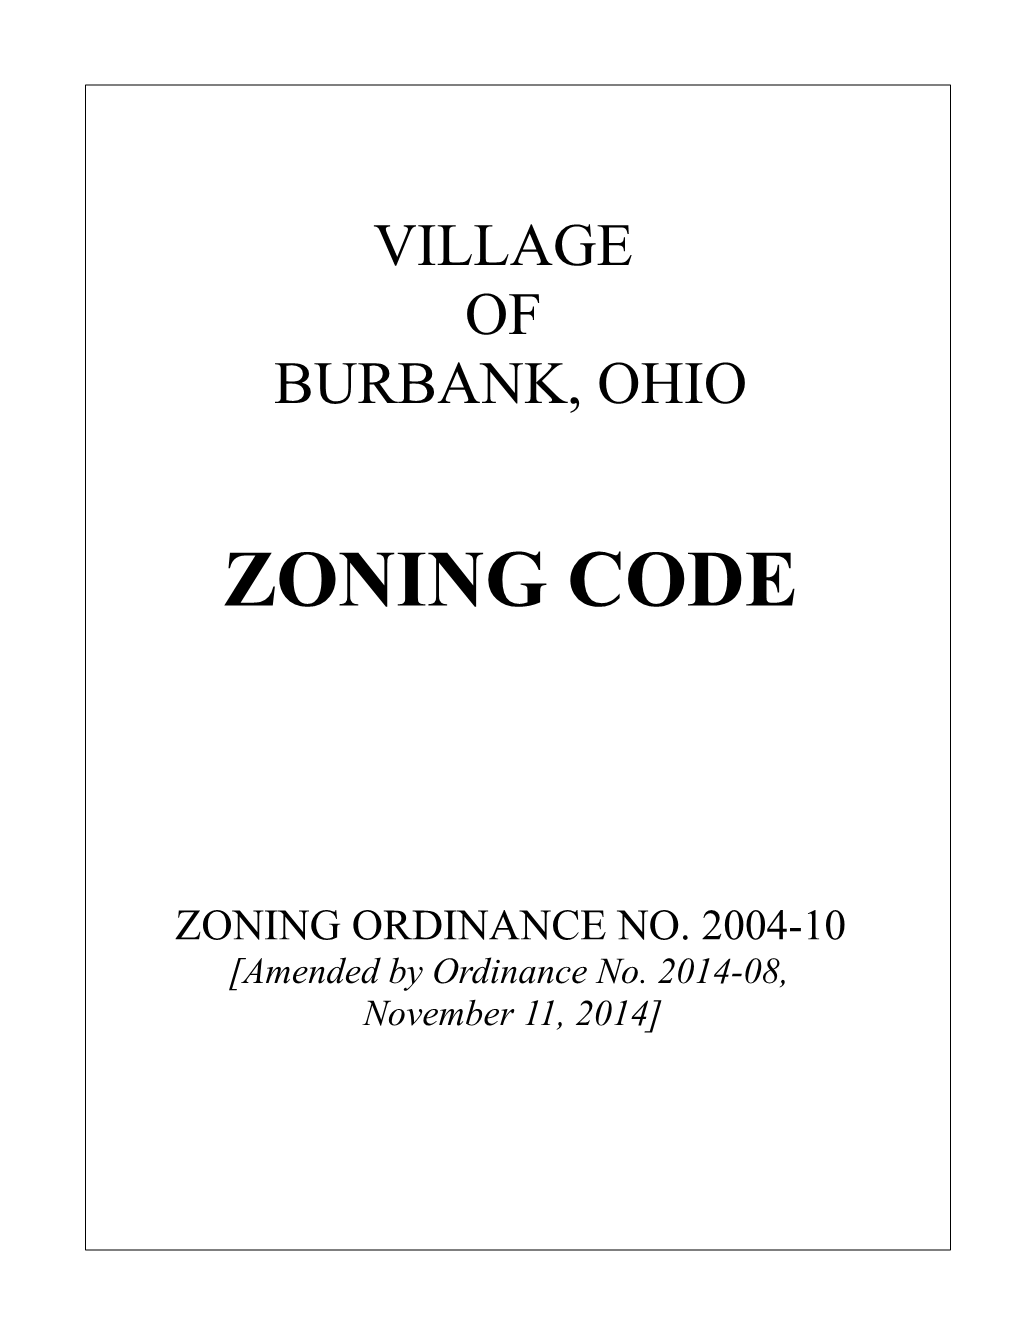 An Ordinance to Regulate and Restrict the Location of Buildings and Other Structures, And